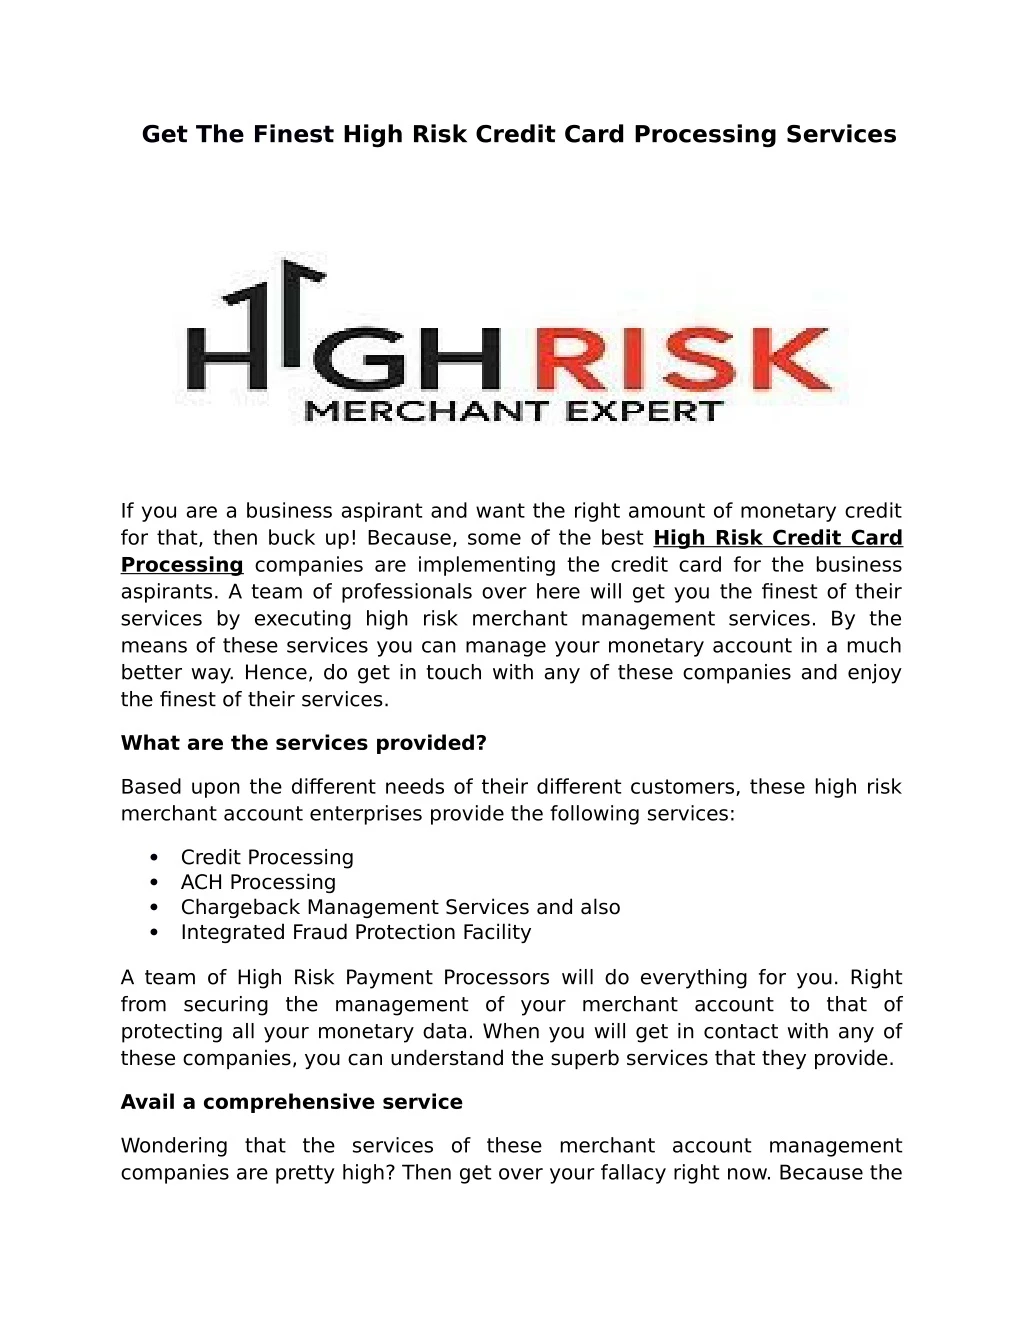 get the finest high risk credit card processing